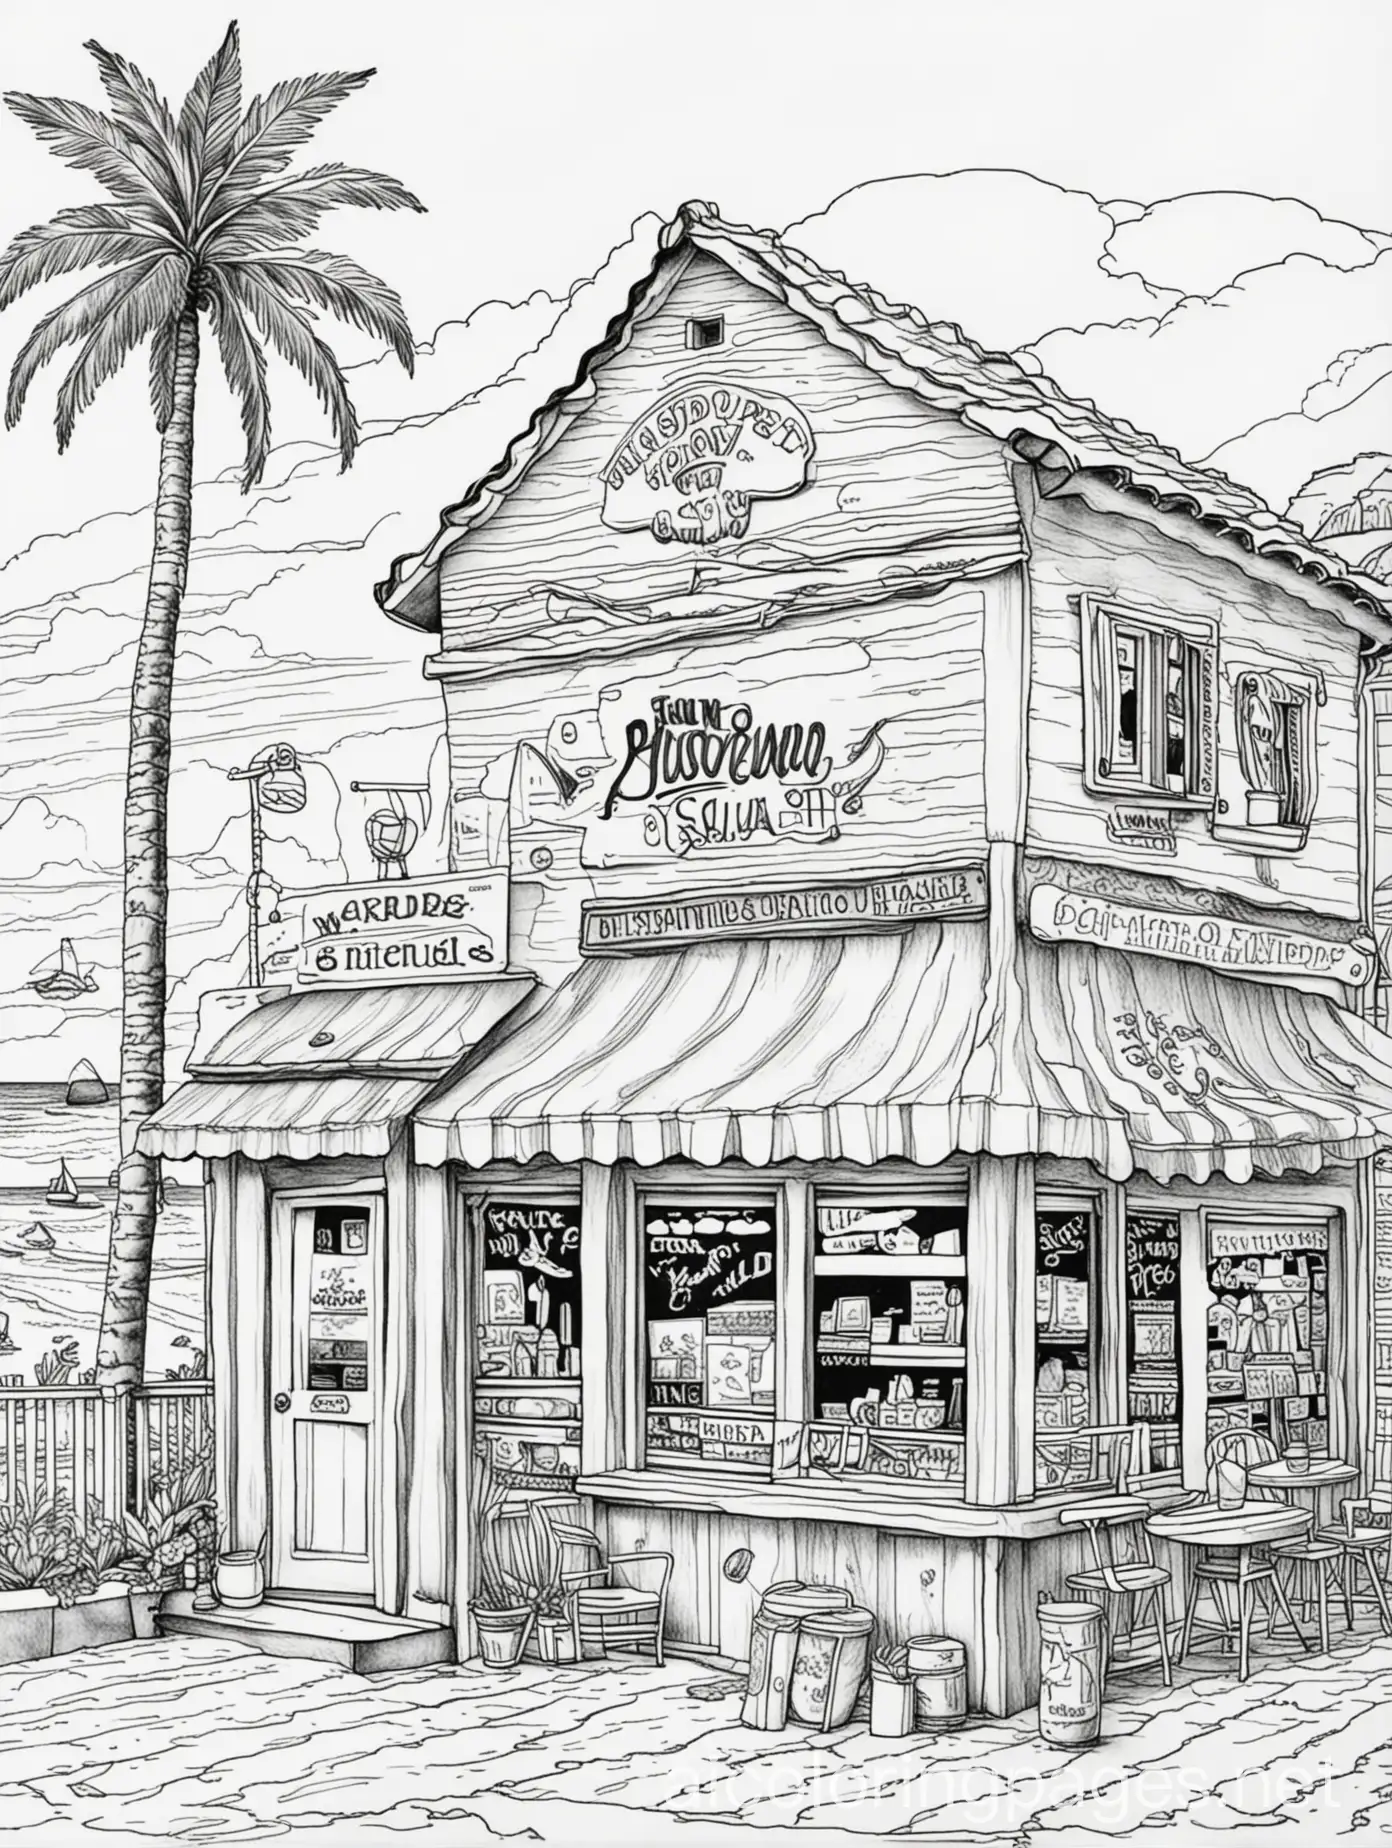 Adult coloring page, white background, seaside surf shop and pizza restaurant, Coloring Page, black and white, line art, white background, Simplicity, Ample White Space. The background of the coloring page is plain white to make it easy for young children to color within the lines. The outlines of all the subjects are easy to distinguish, making it simple for kids to color without too much difficulty